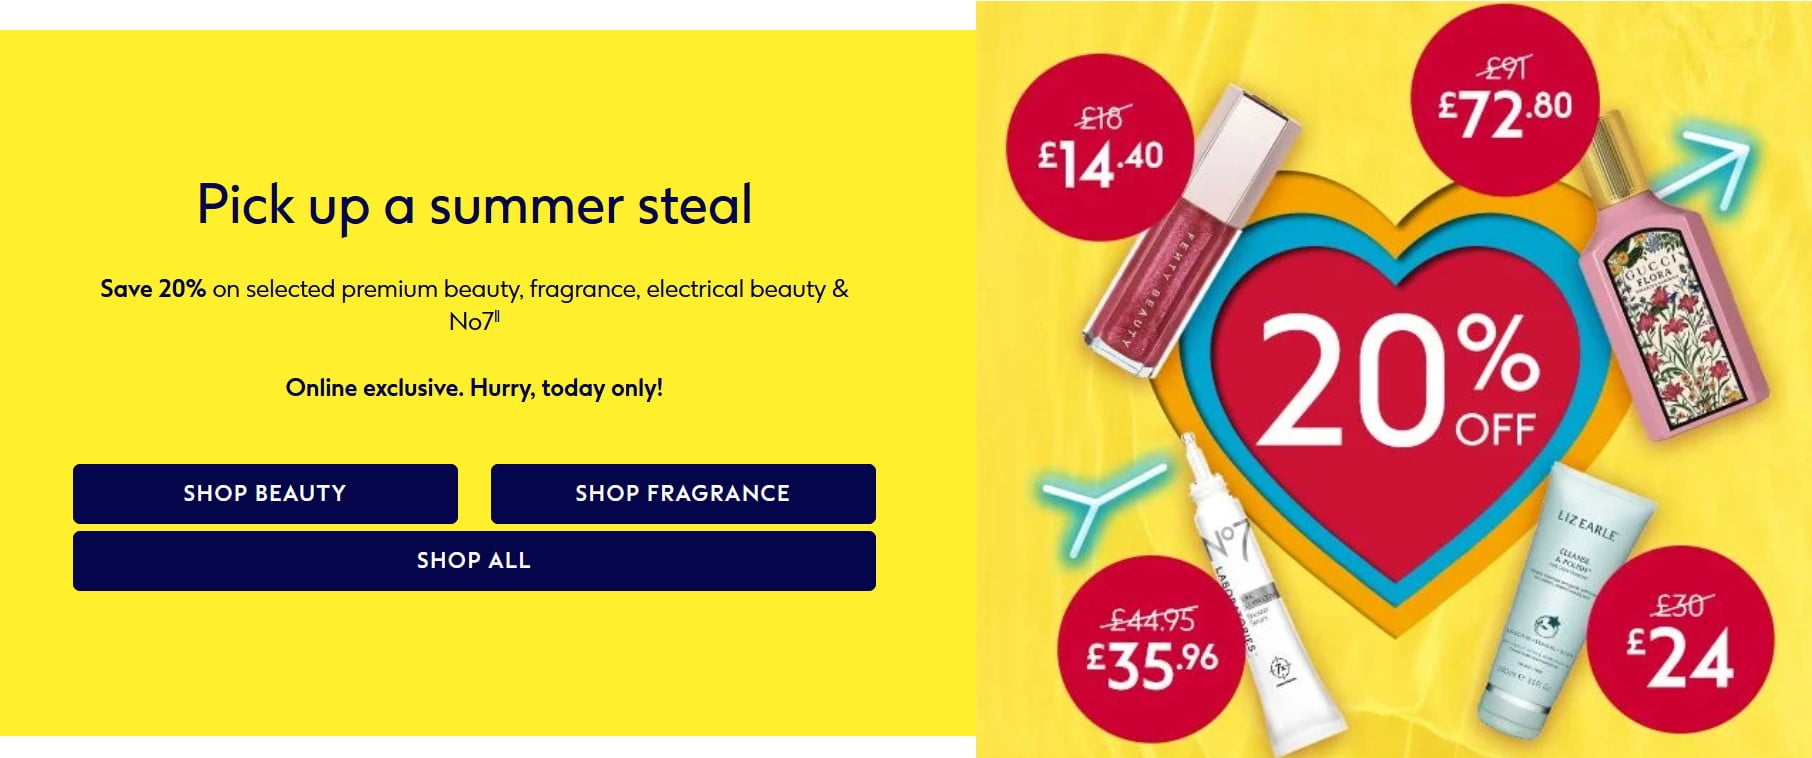 Save 20% on Selected Premium Beauty, Fragrance, Electricals & No7 at Boots